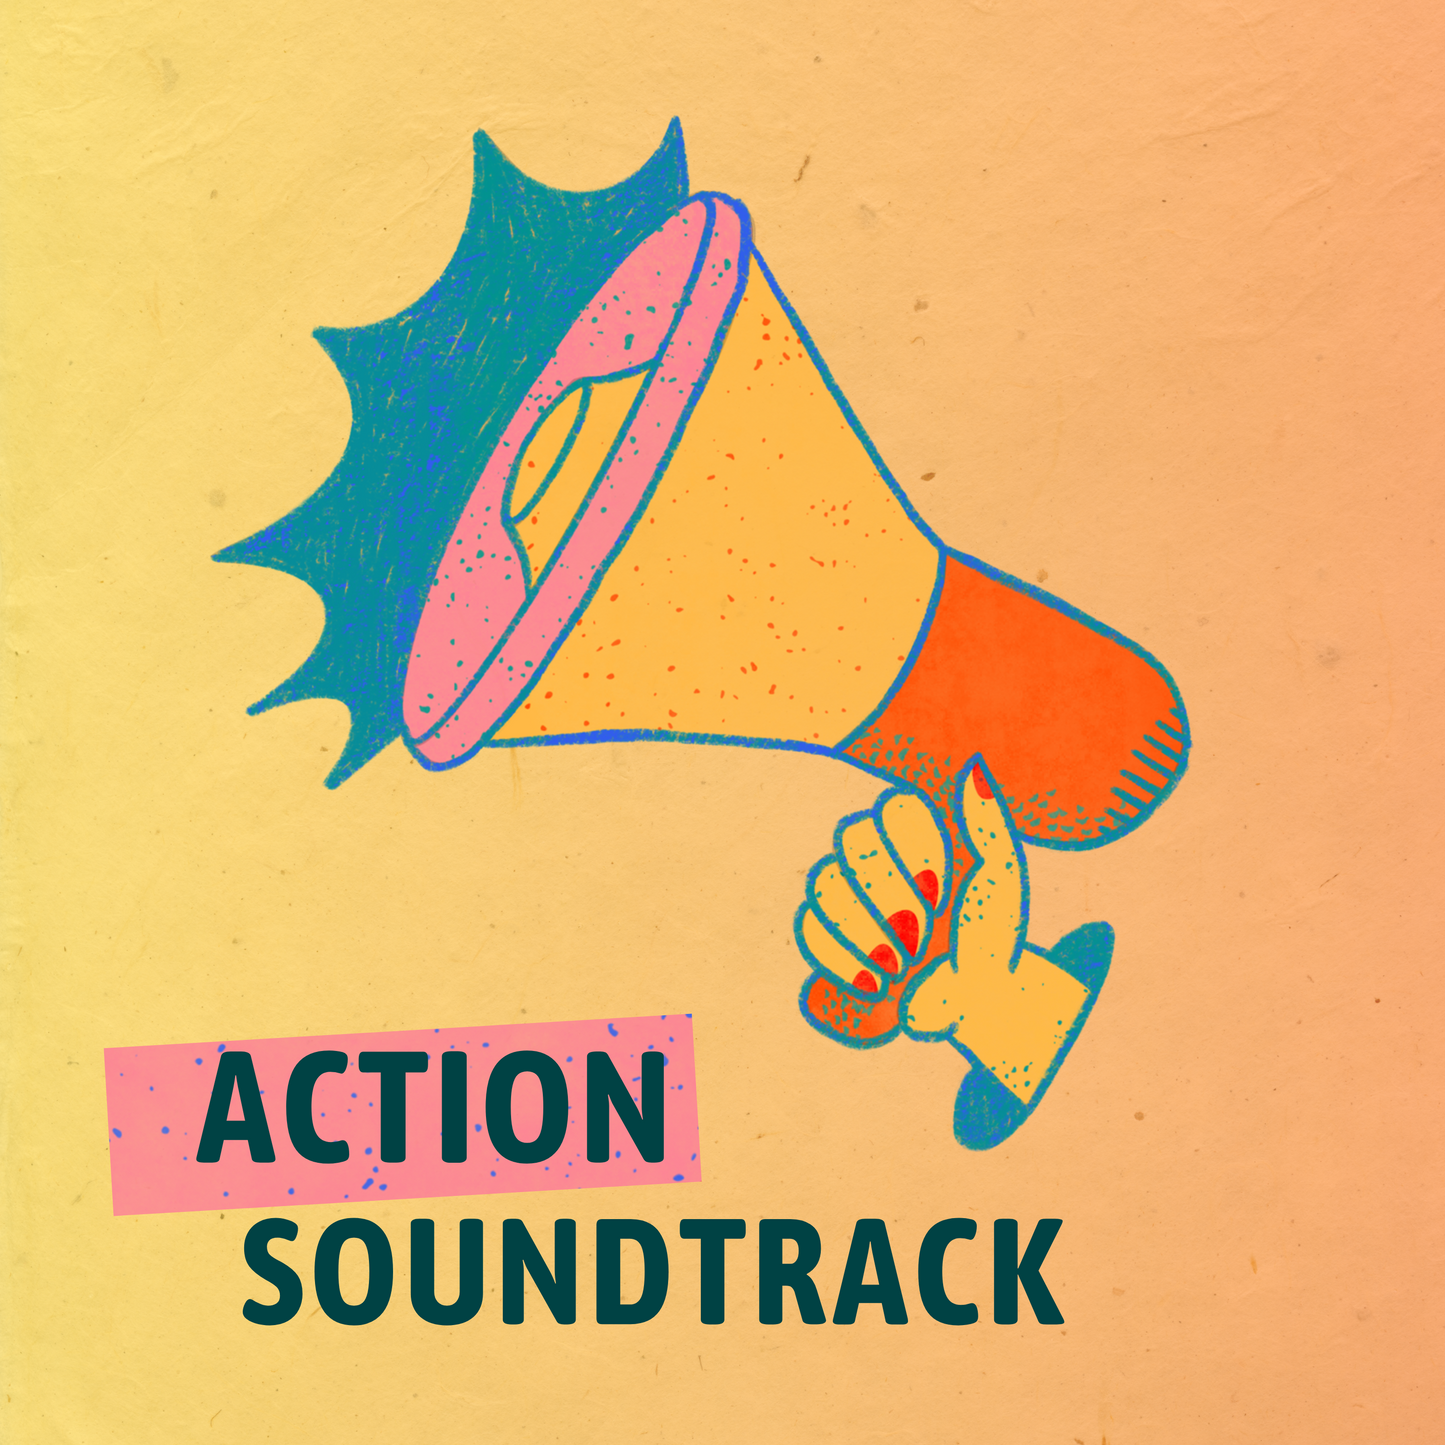 Action Music : Introductory upbeat music